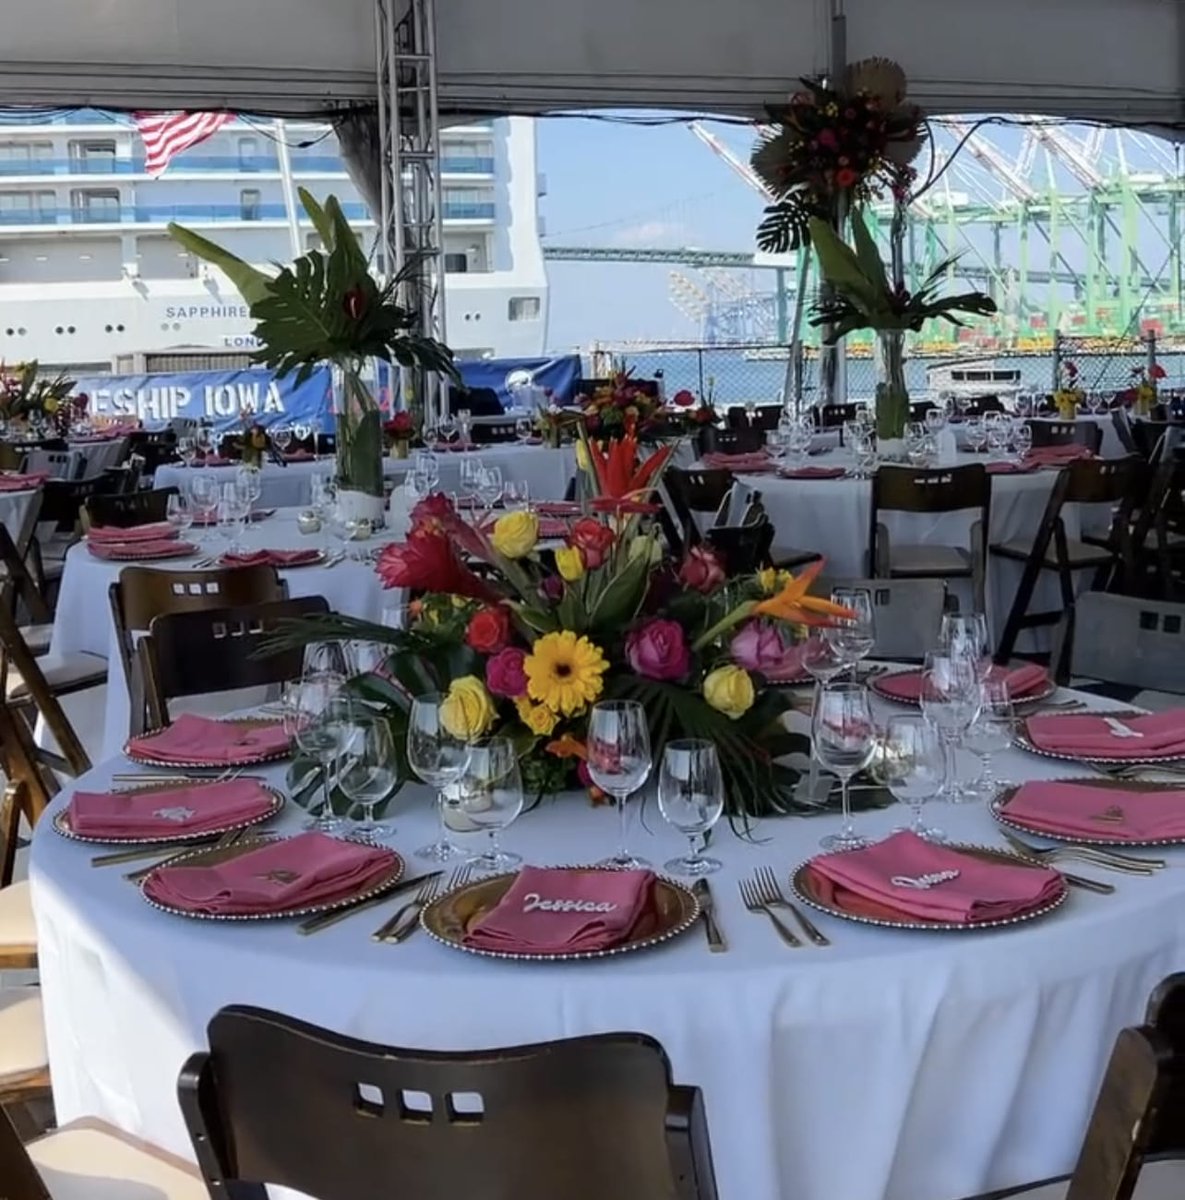 Dream events don't just happen; they're planned. Our event planners are here to help with all your needs. Visit us at 5135 Torrance Blvd, Torrance, CA 90503 today. #EventPlanner #TorranceCA
flowerstorrance.com/about_us